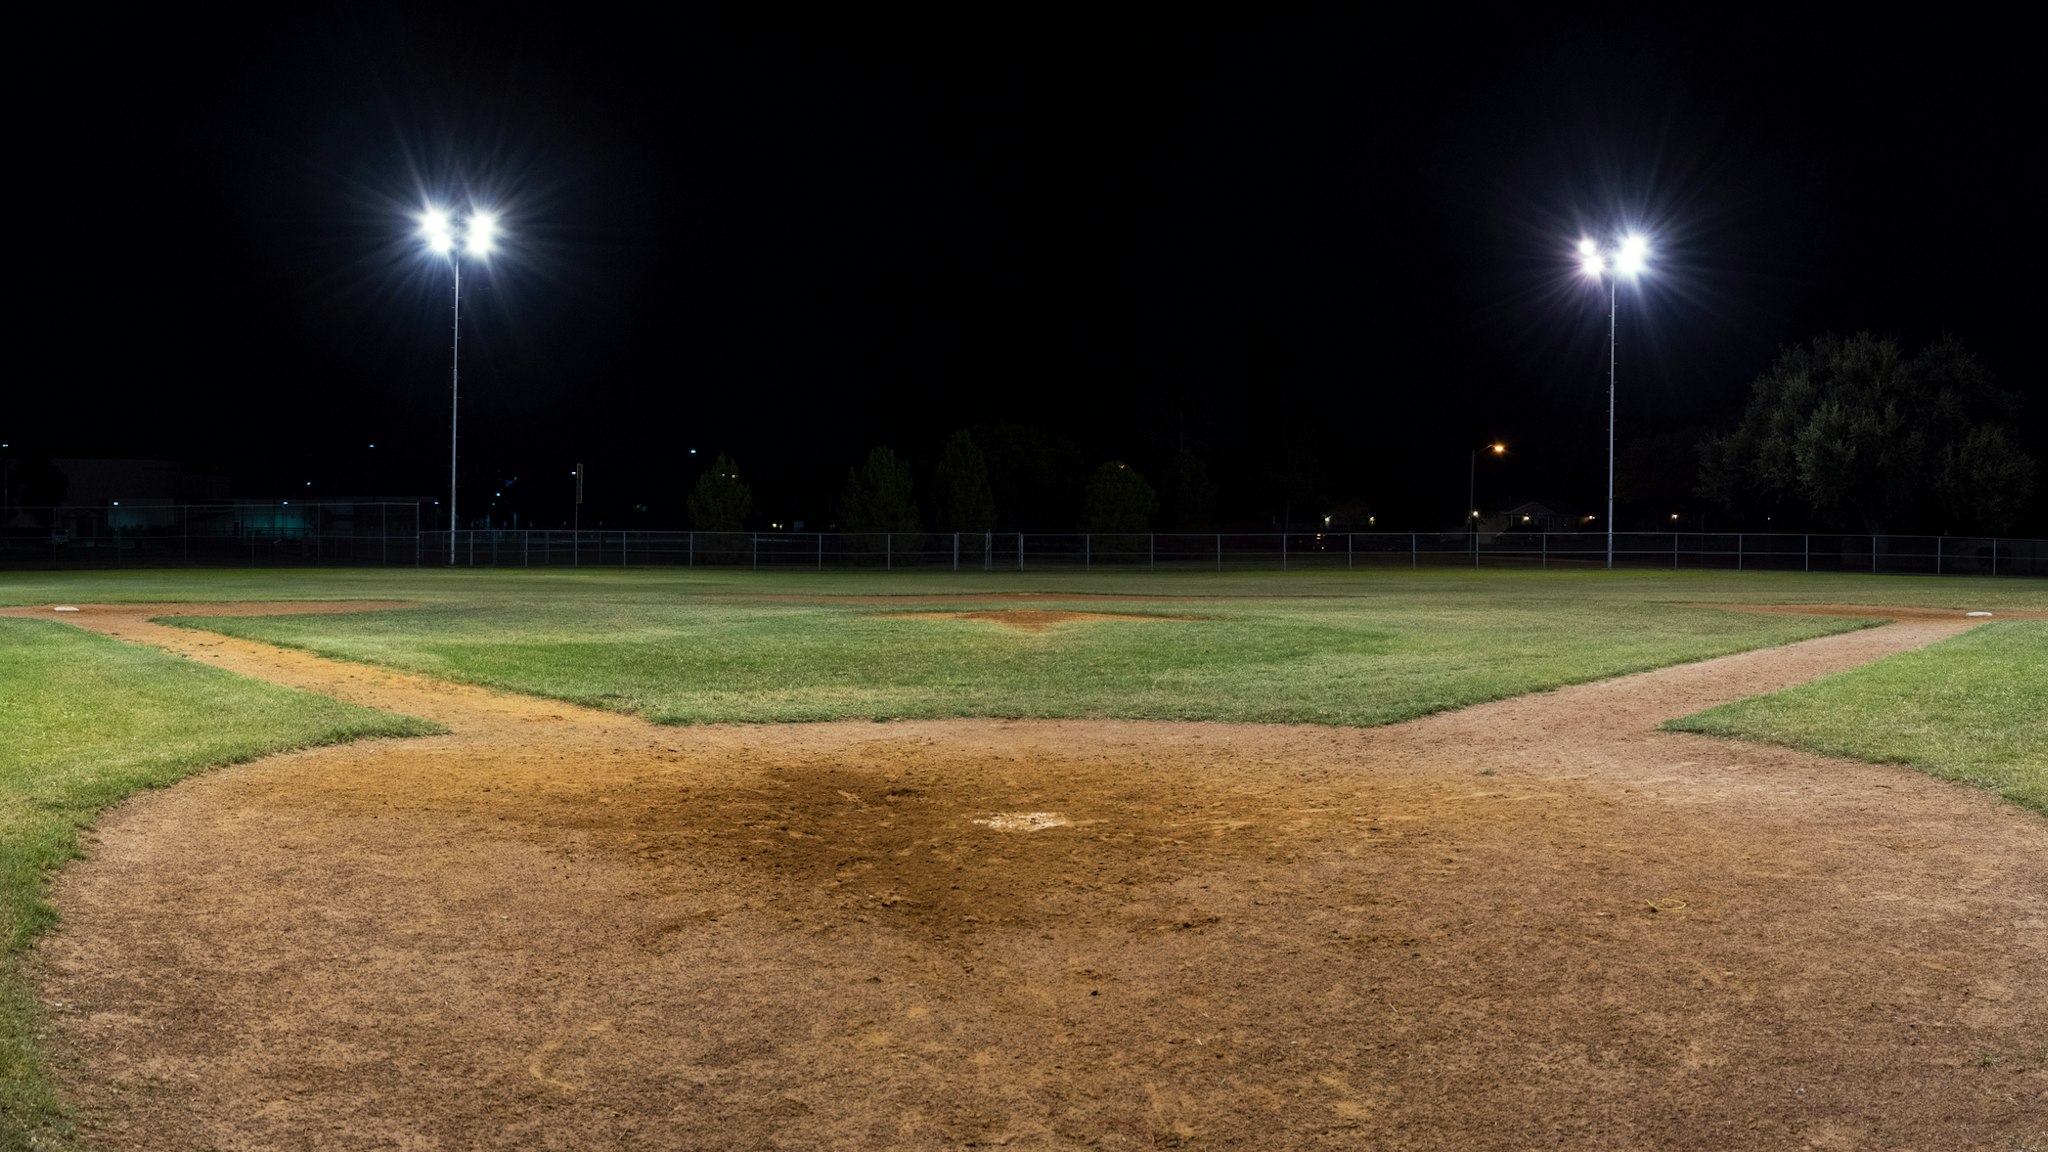 Panorama night photo of an empty baseball field at night with the lights on taken behind home plate and looking out across the pitcher's mound onto the field.